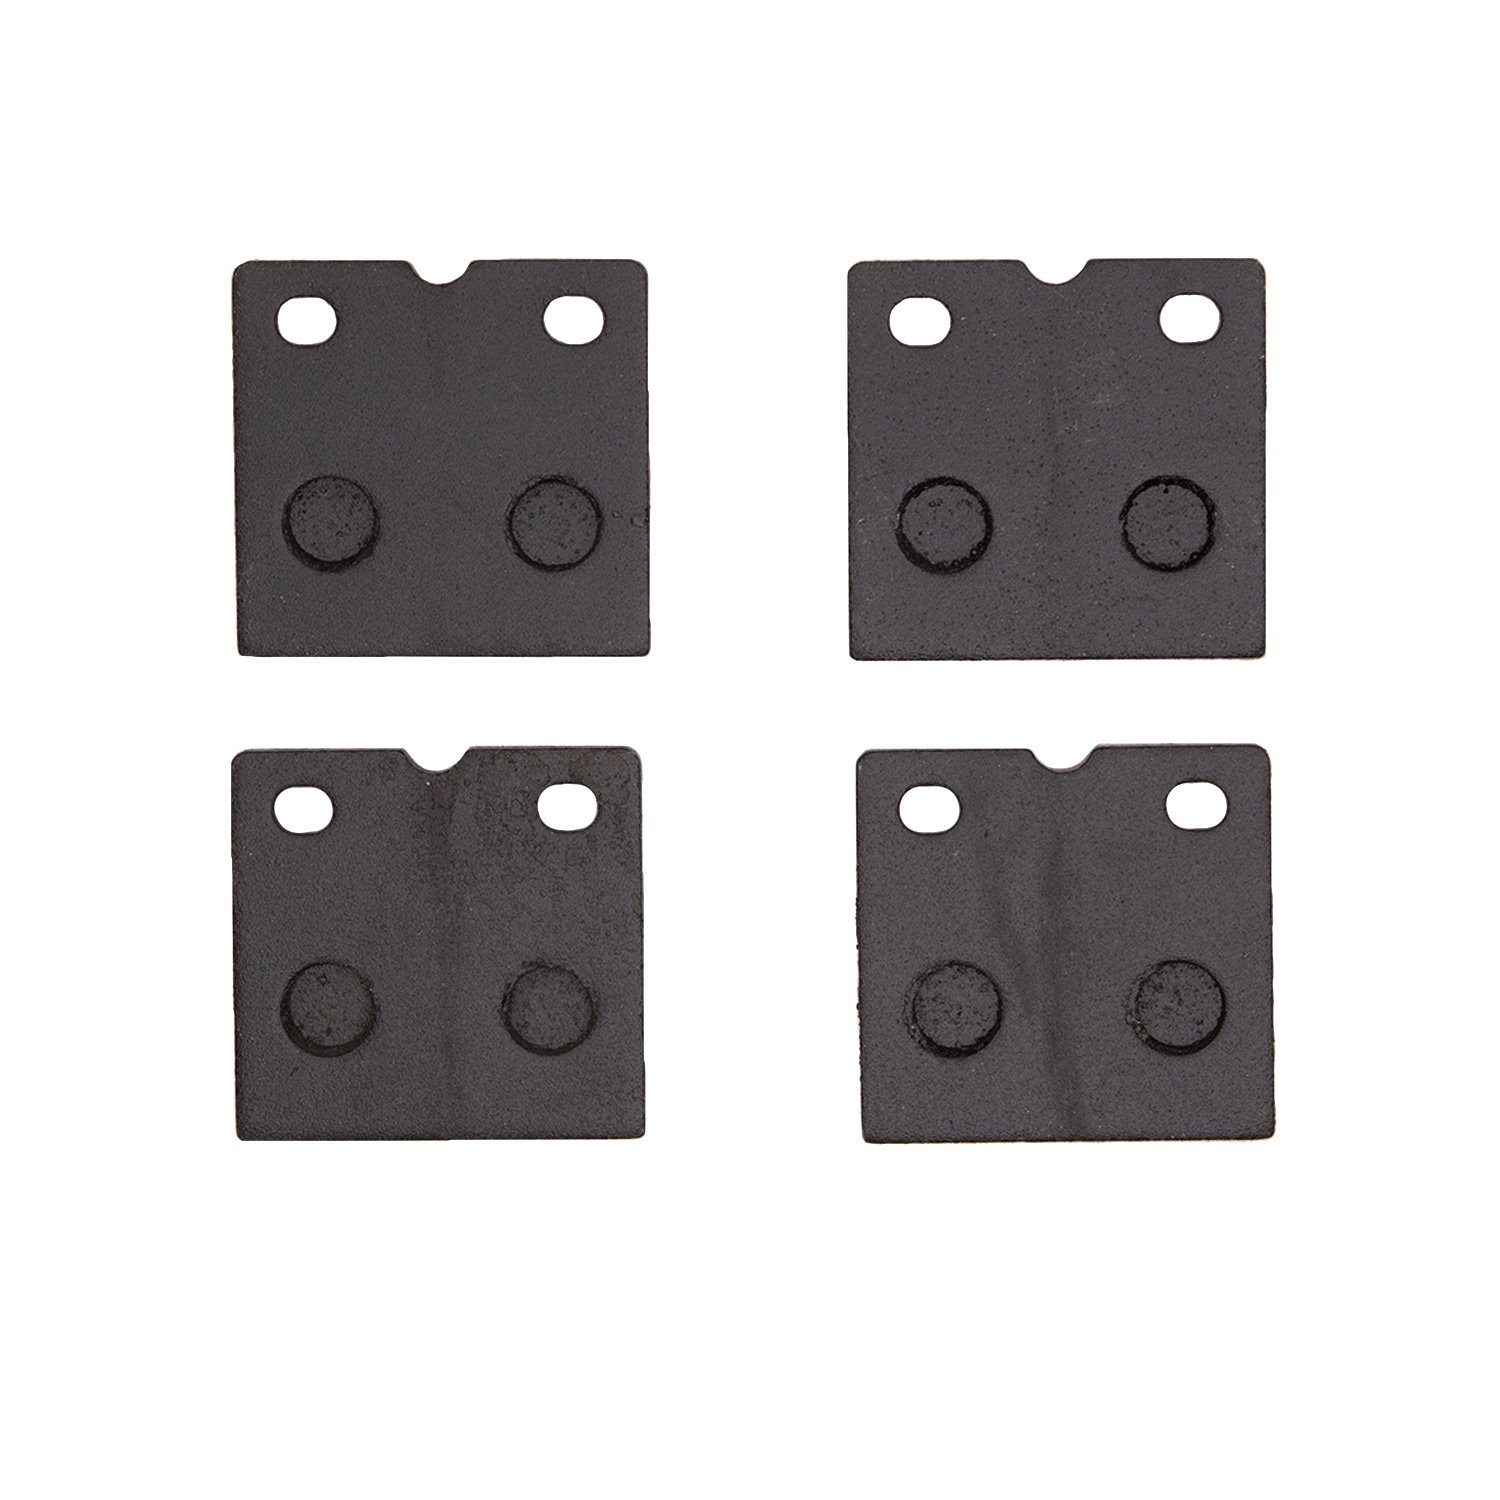 1551-0971-00 5000 Advanced Low-Metallic Brake Pads, Fits Select Multiple Makes/Models, Position: Parking